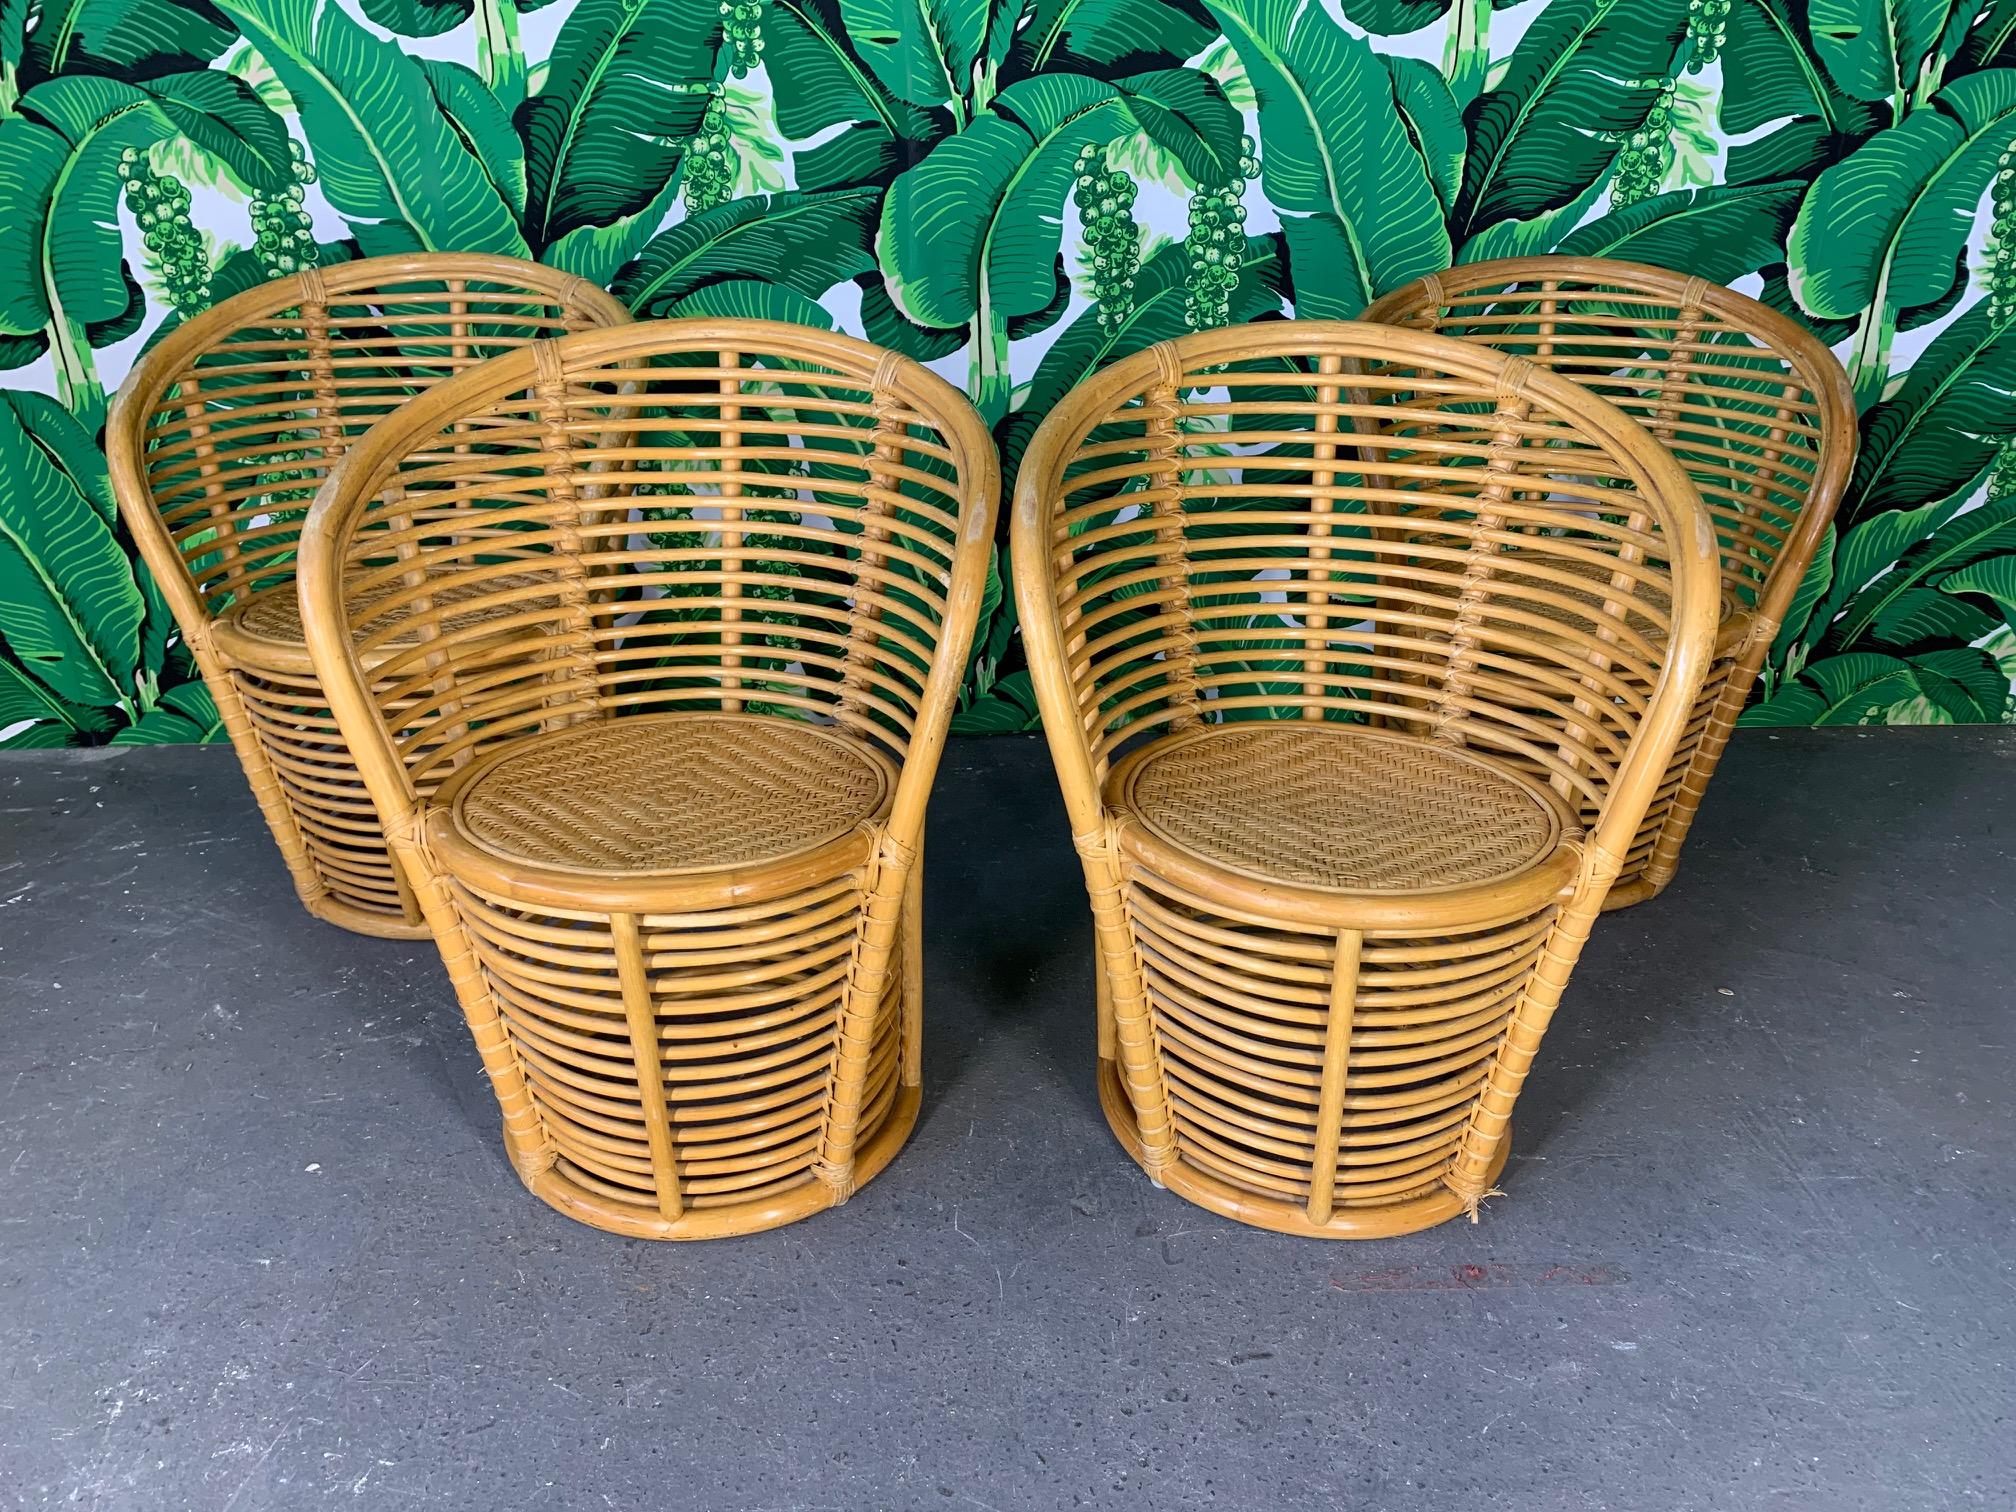 Rattan barrel dining chairs feature a unique horizontal rattan construction. Set of 4. Good condition with minor imperfections consistent with age, circa 1970s.